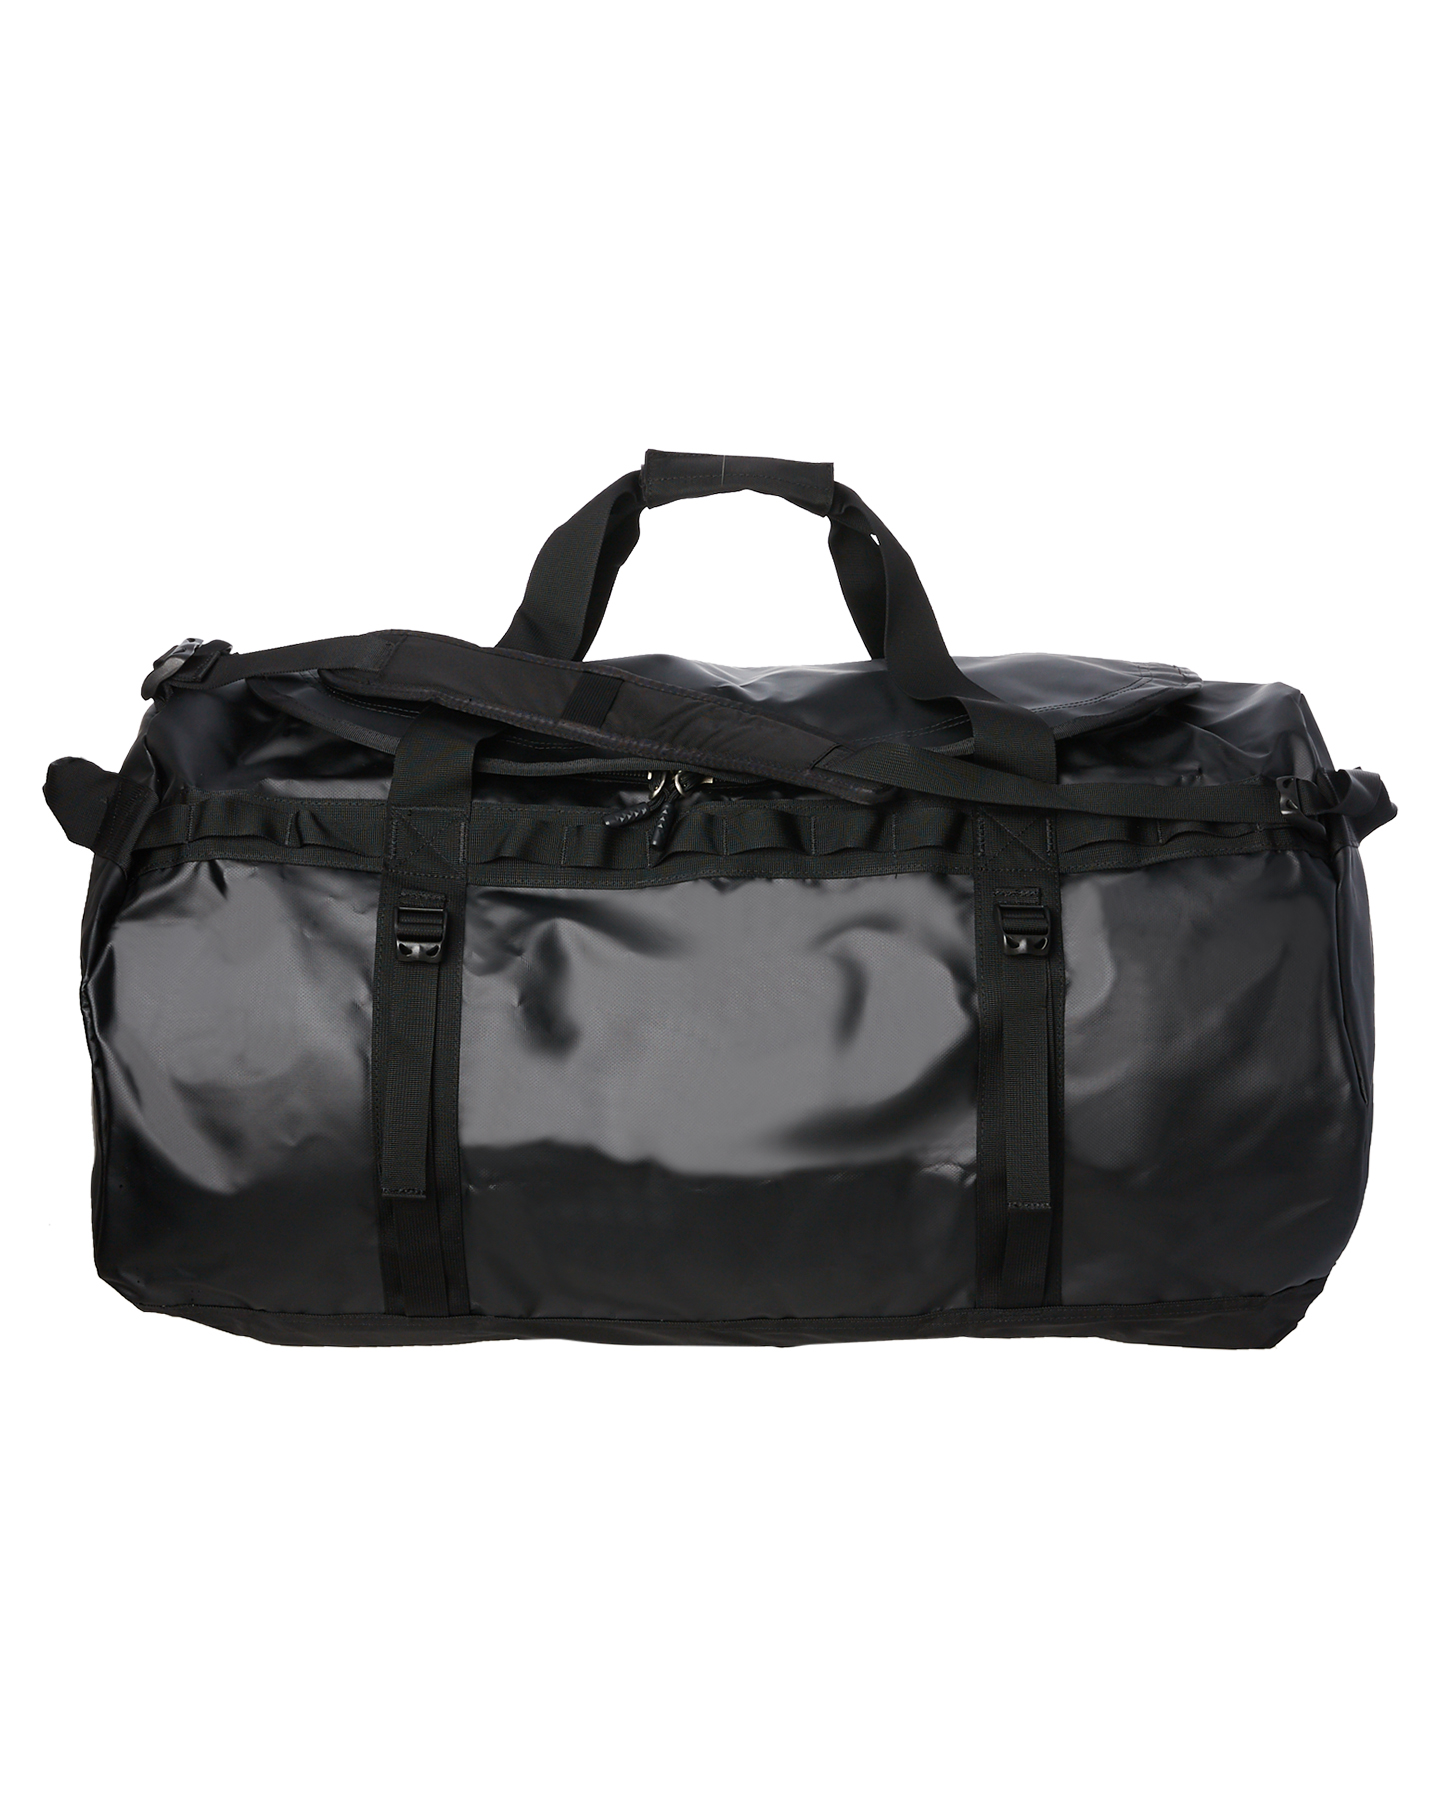 The North Face Base Camp Xl 132L Duffle Bag - Black | SurfStitch